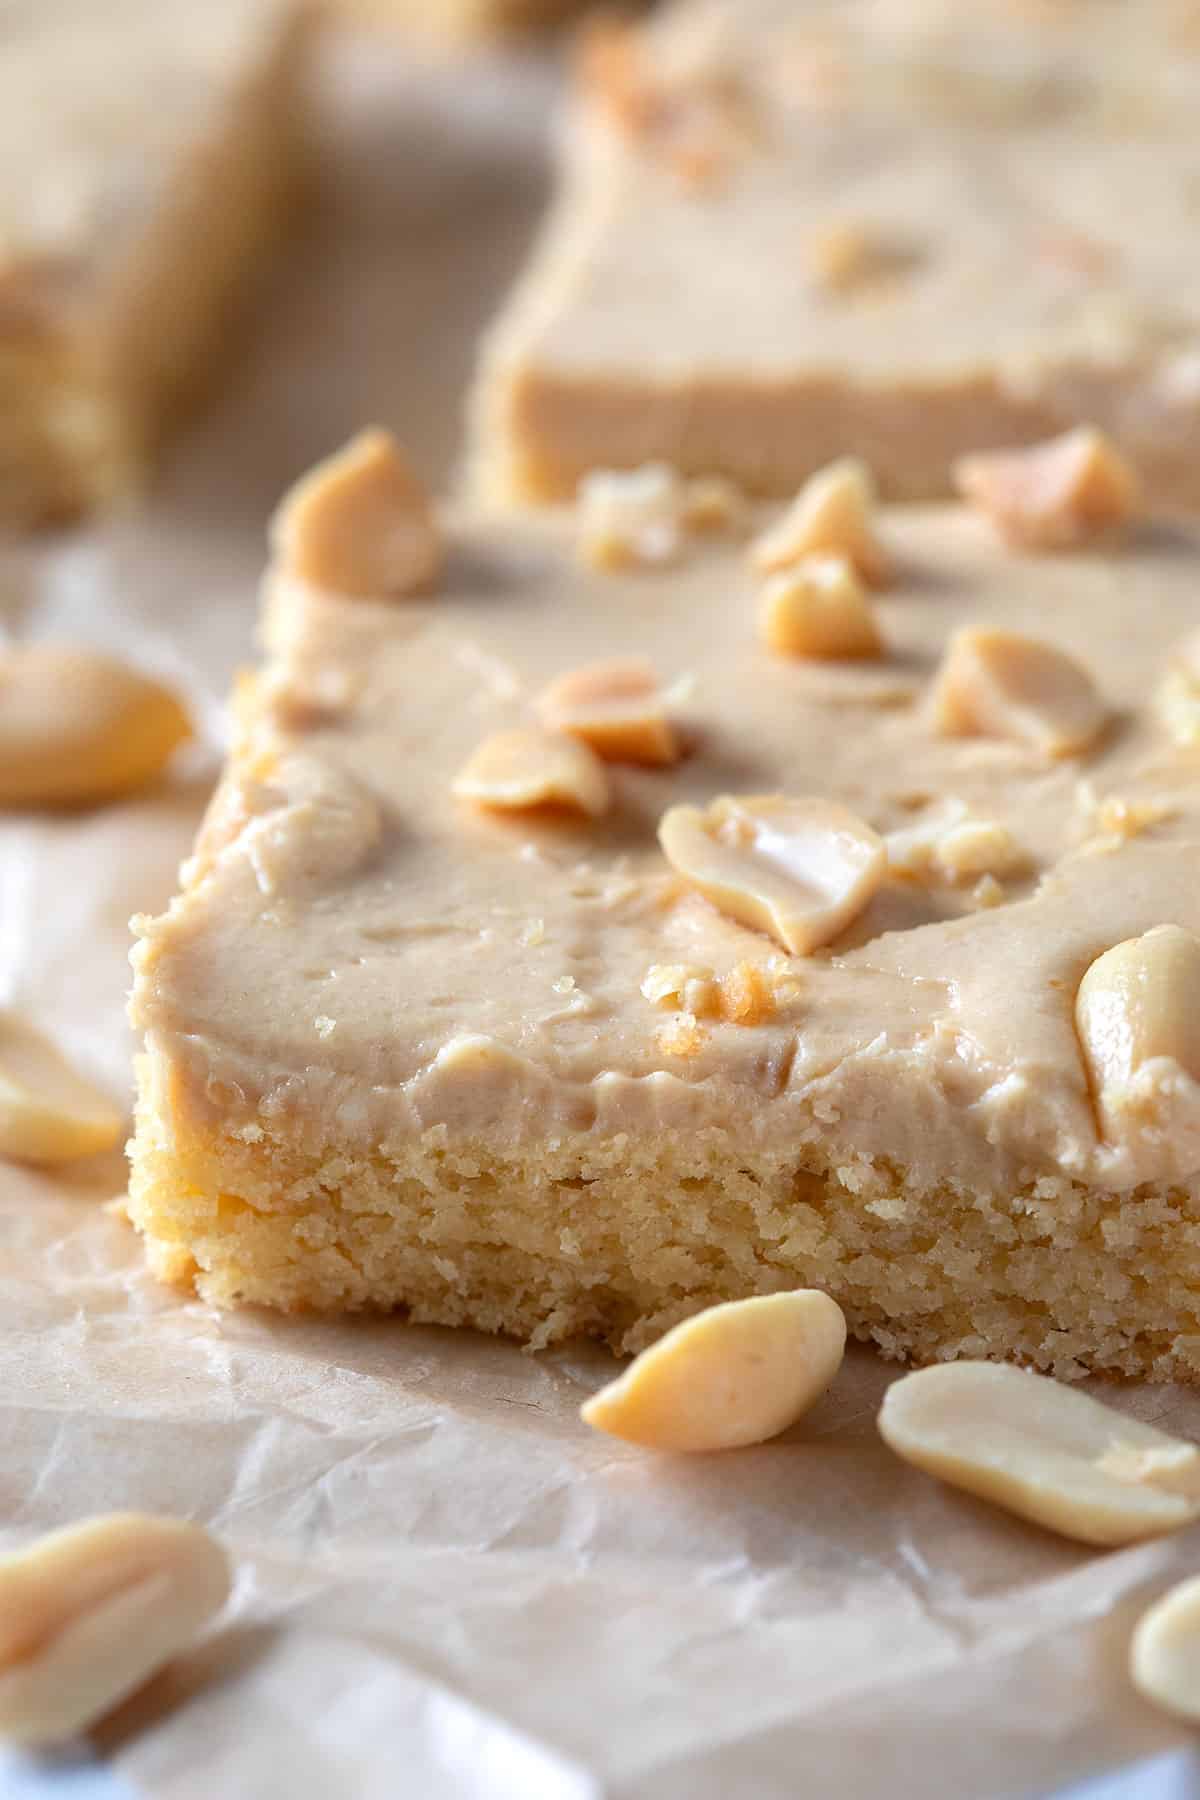 Close up shot of a slice of Keto Peanut Butter Sheet Cake with peanuts strewn around.